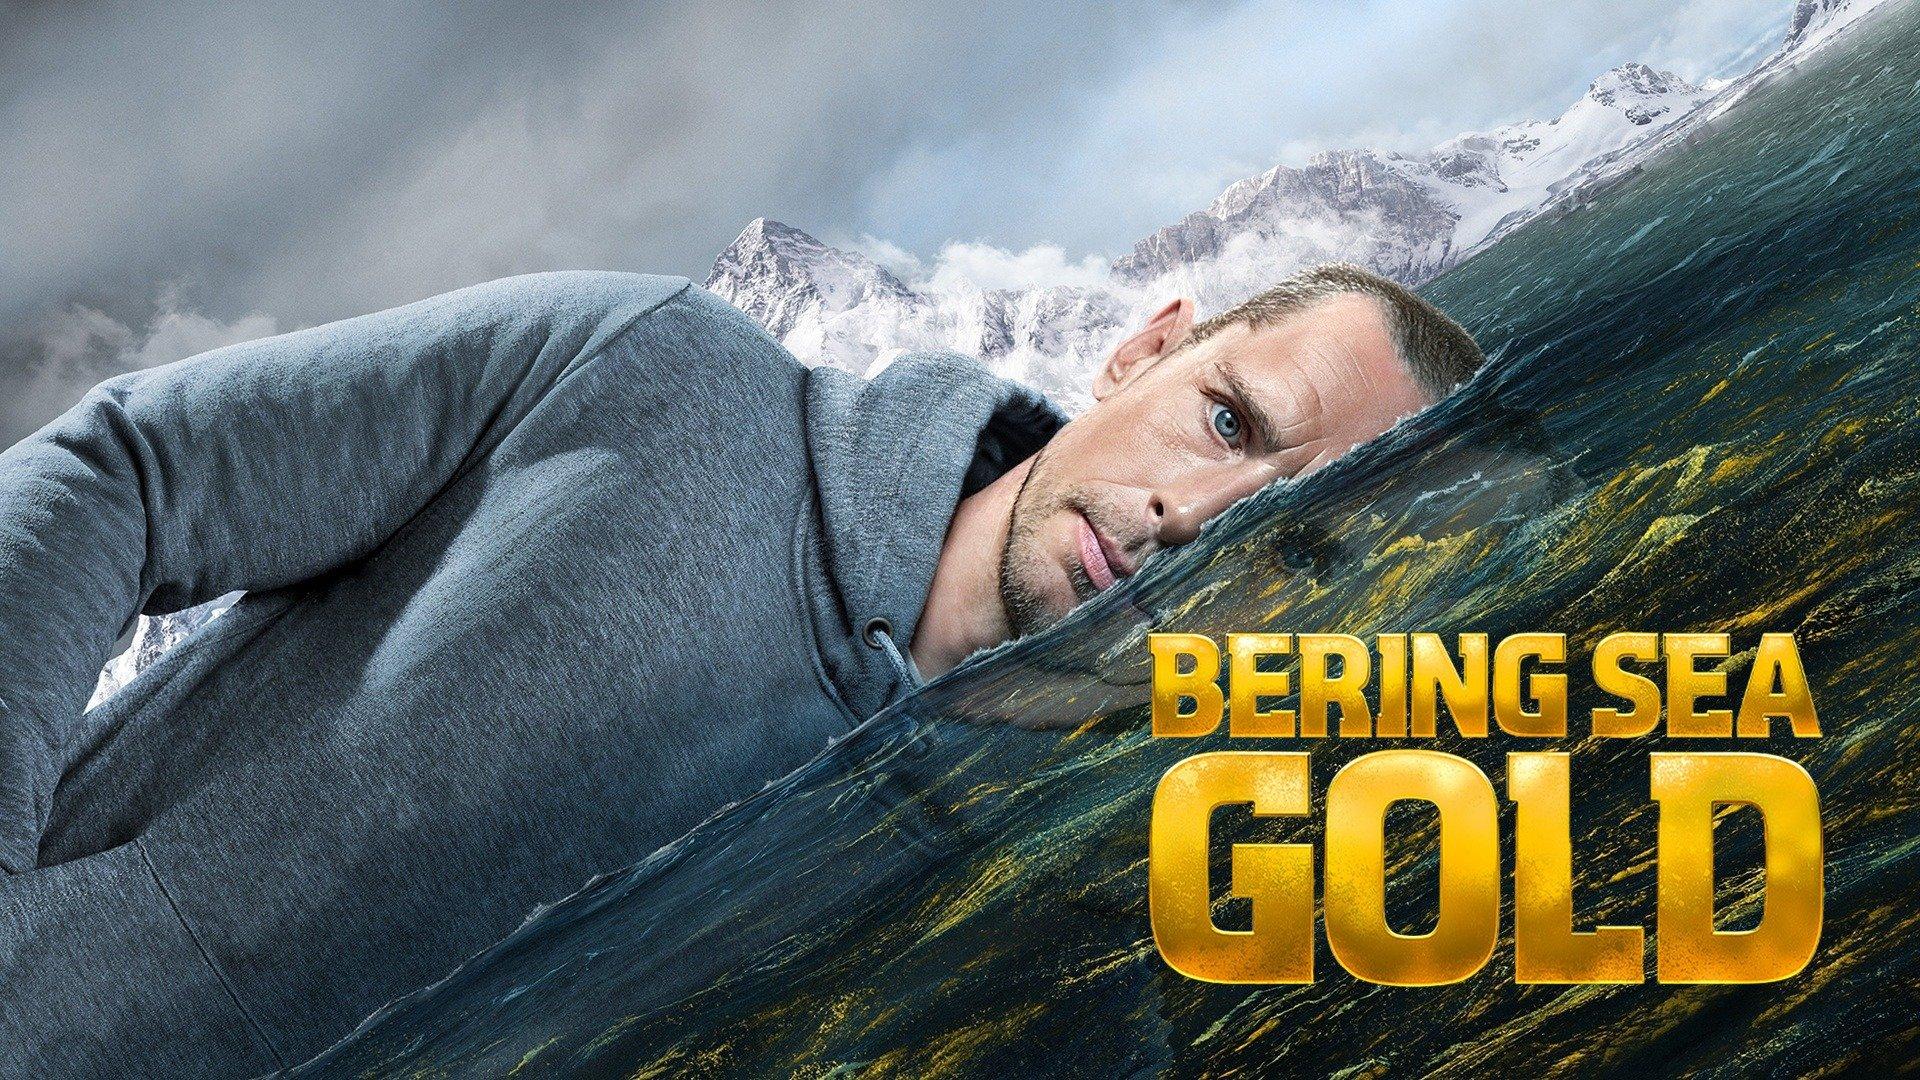 Watch Bering Sea Gold Streaming Online on Philo (Free Trial)